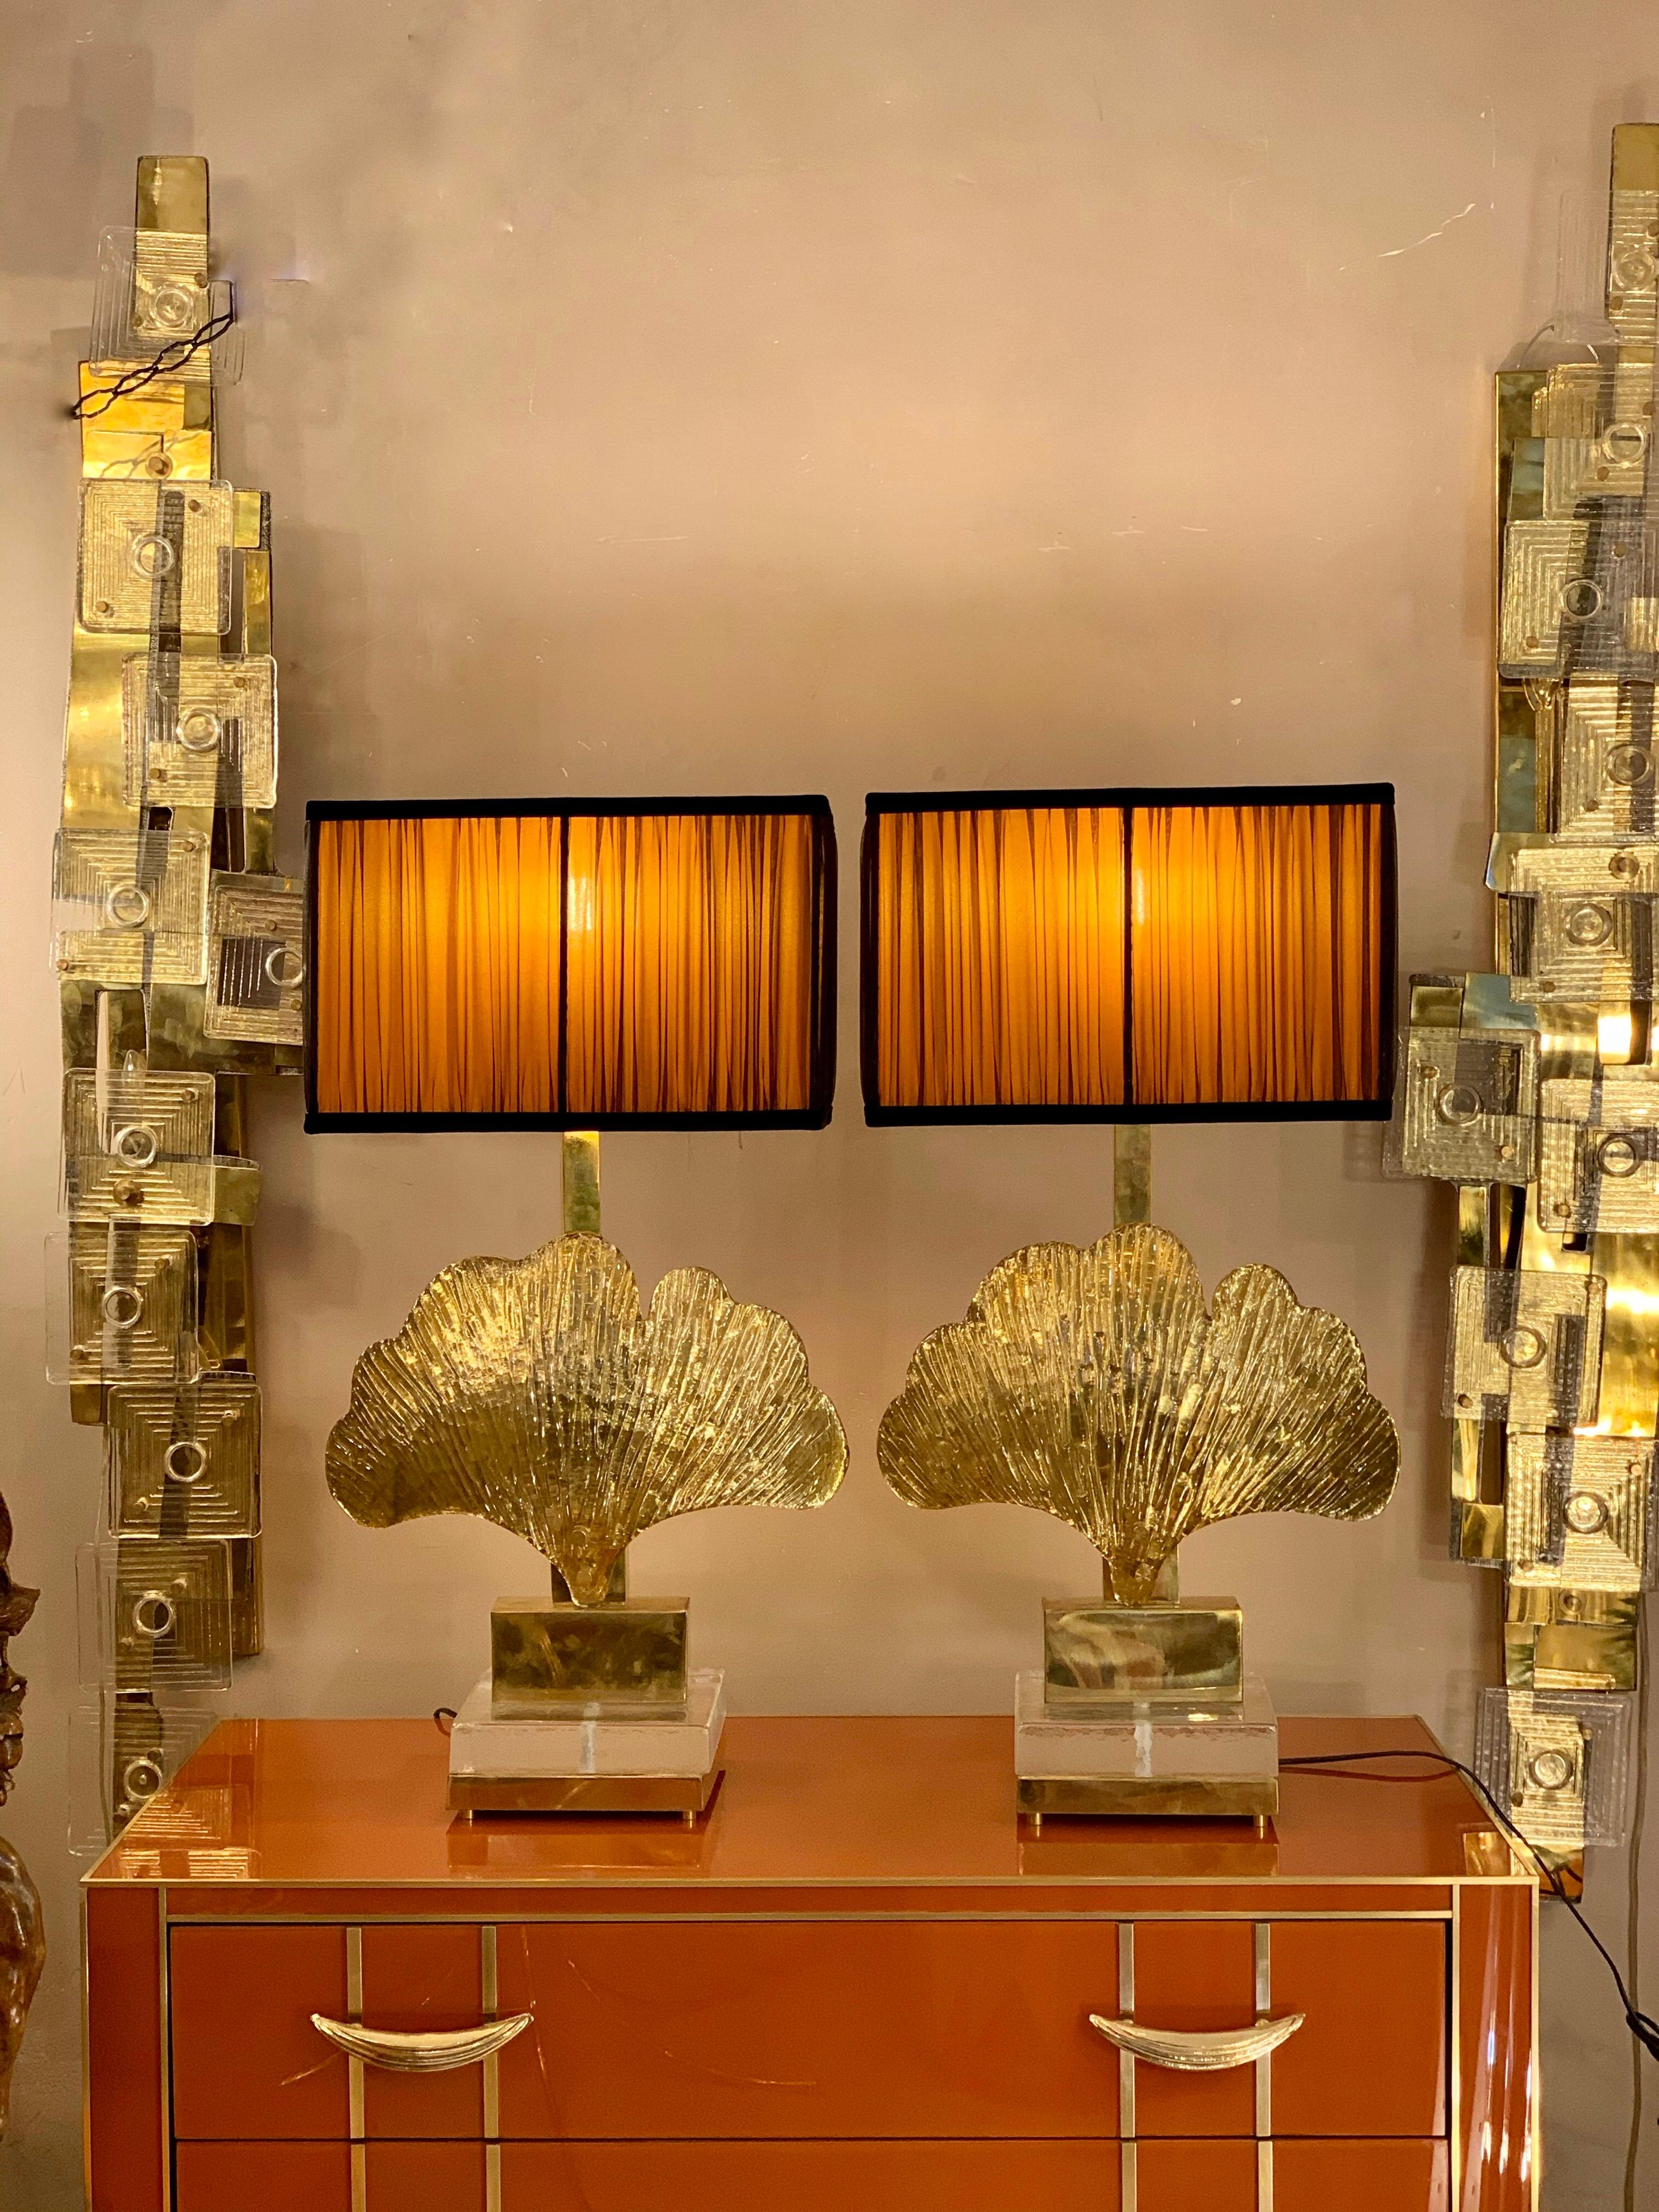 Pair of brass and gold mirrored Murano gingko leaf table lamps with our hand sewn lampshades in ruched chiffon double color (gold inside and black outside). When the light is on the colors mix each other creating an amazing effect.
The lamps have a